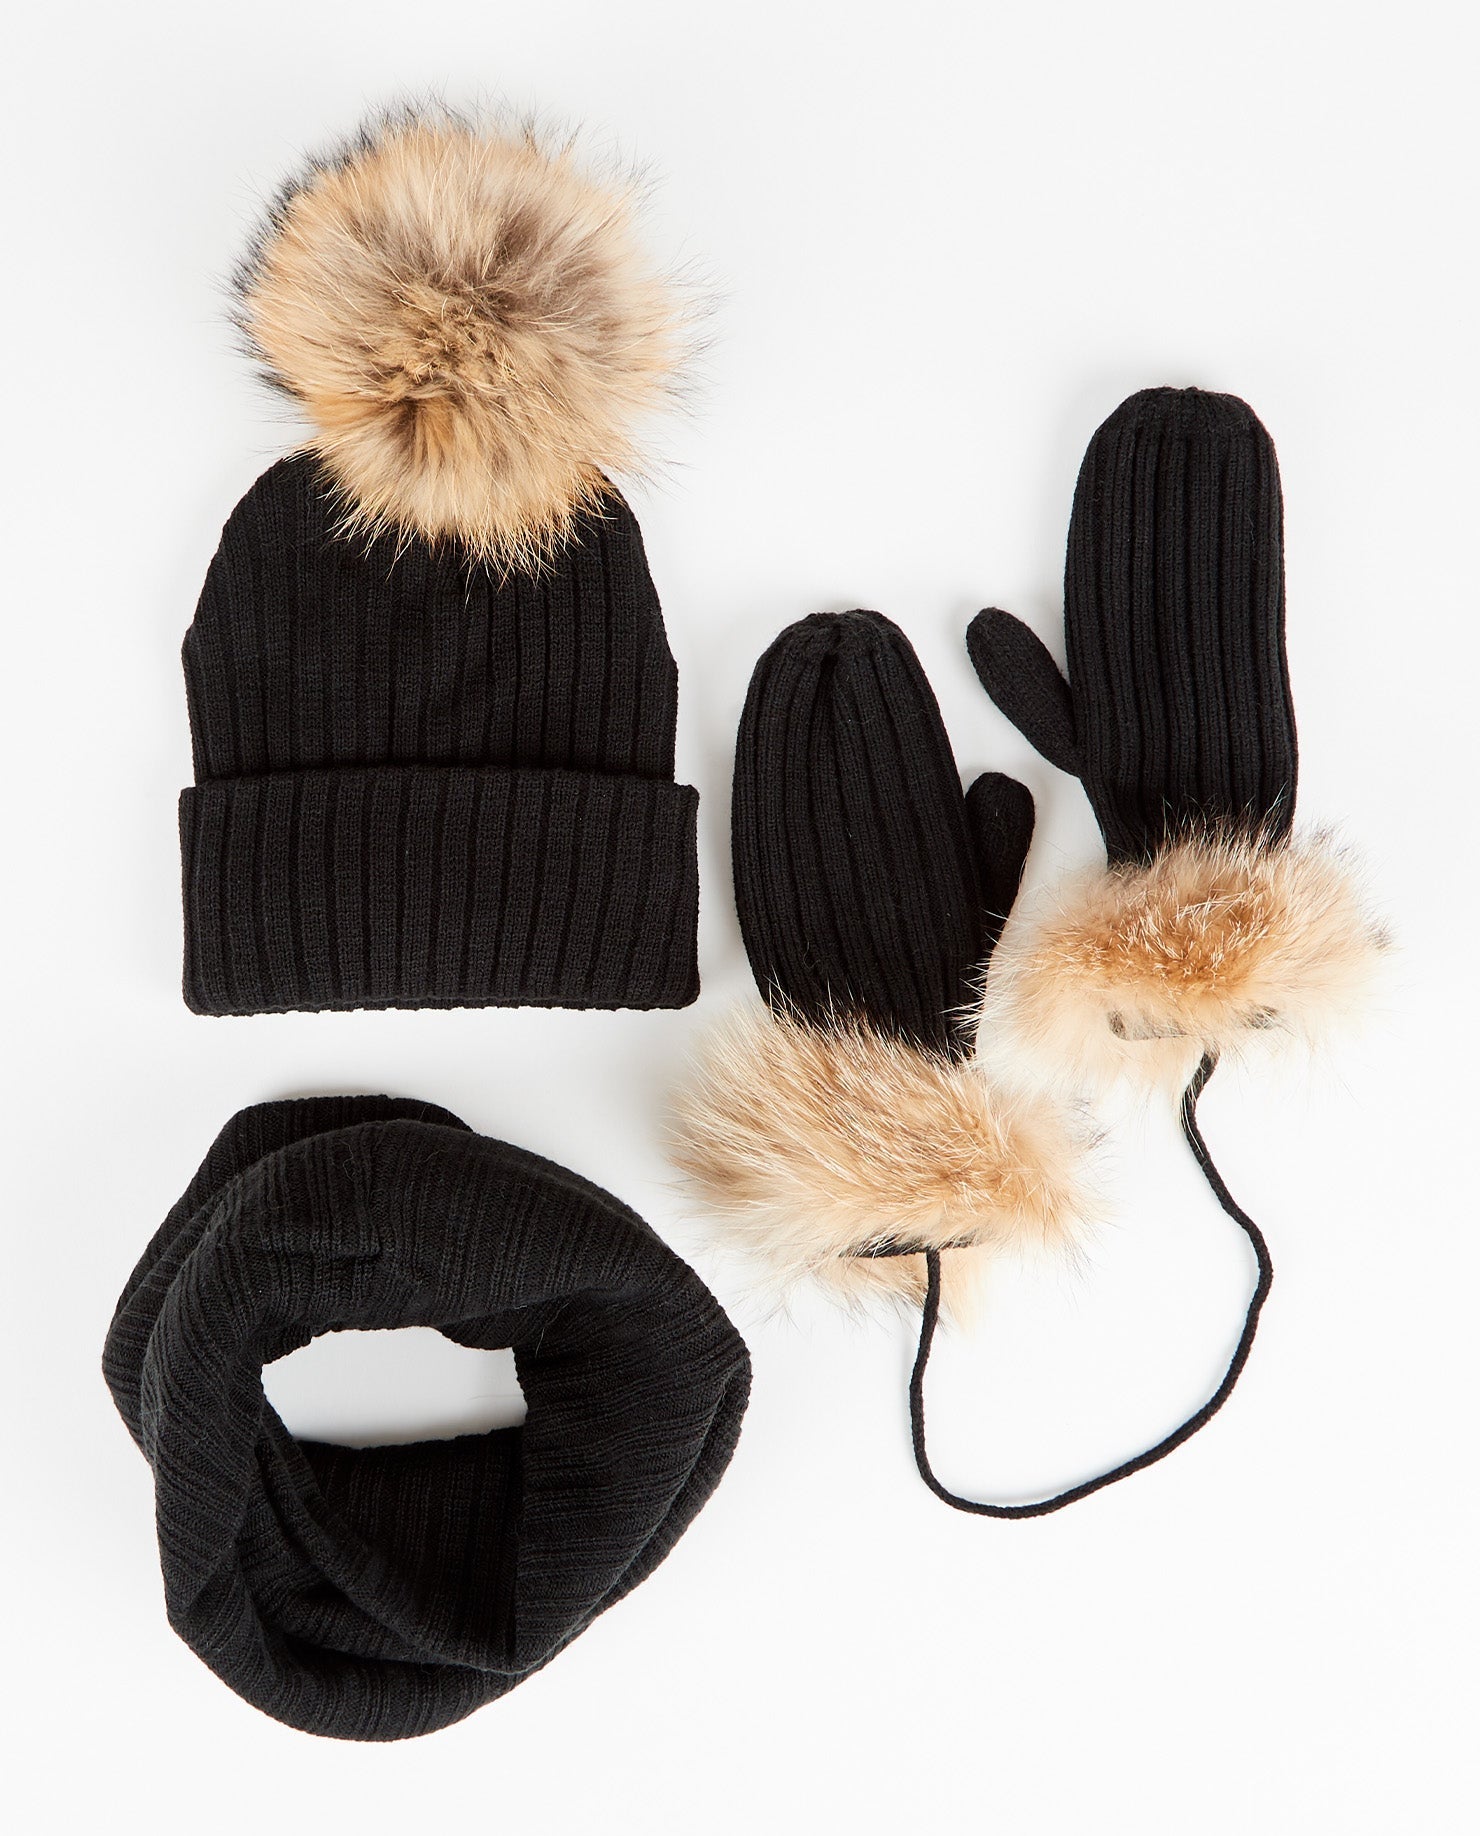 TRIO Tuque, Mitaines et Foulard Doublé Adulte | Adult Beanie, Mittens and Knit Scarf - Mpompon